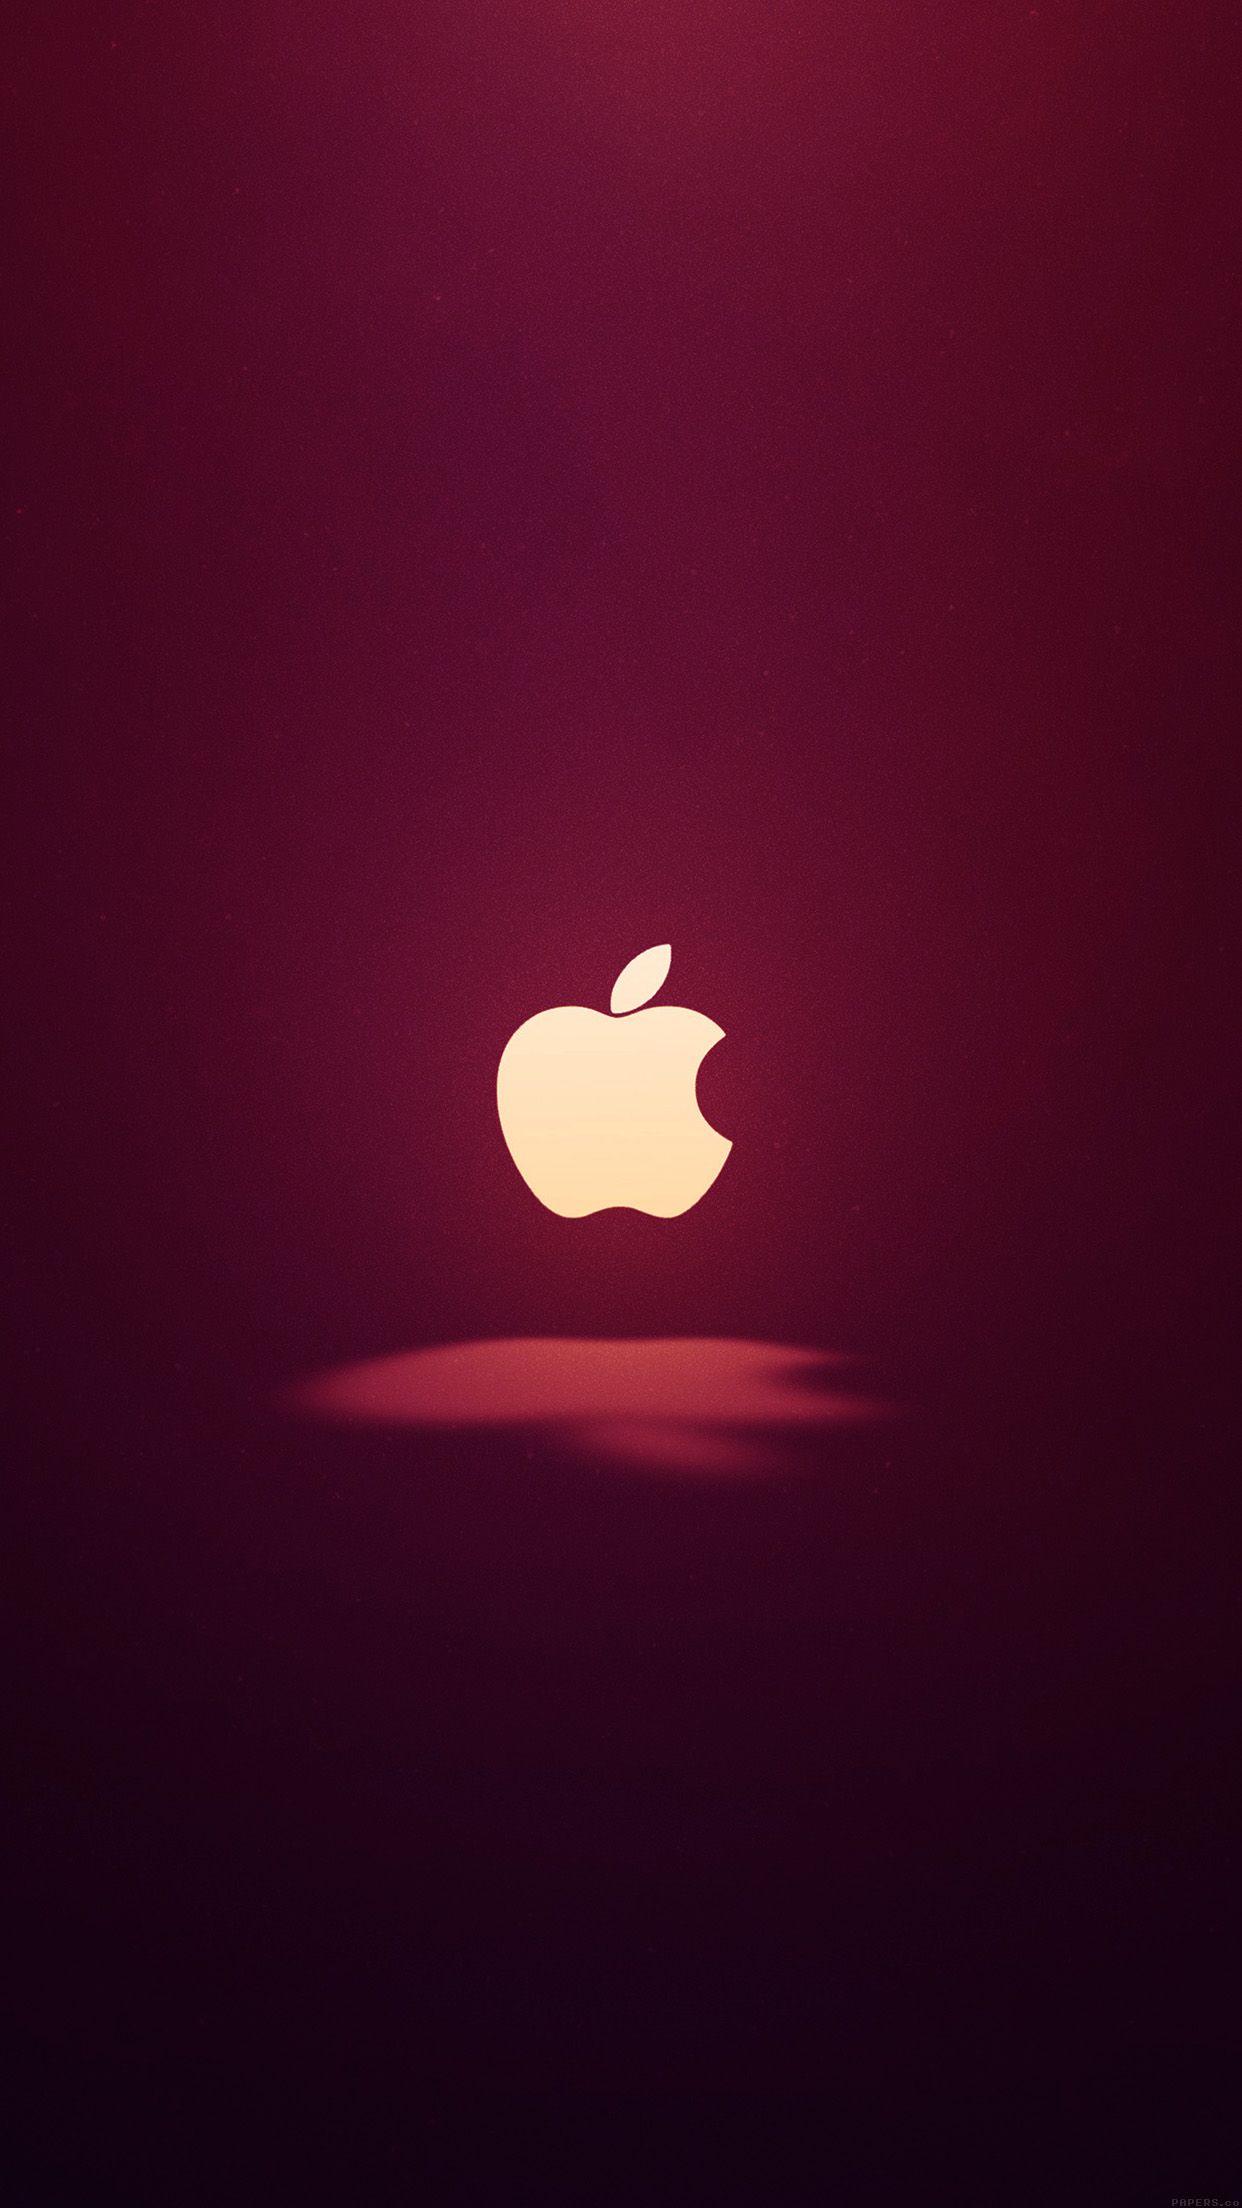 Awesome Apple Logo Love Mania Wine Red Iphone6 Plus